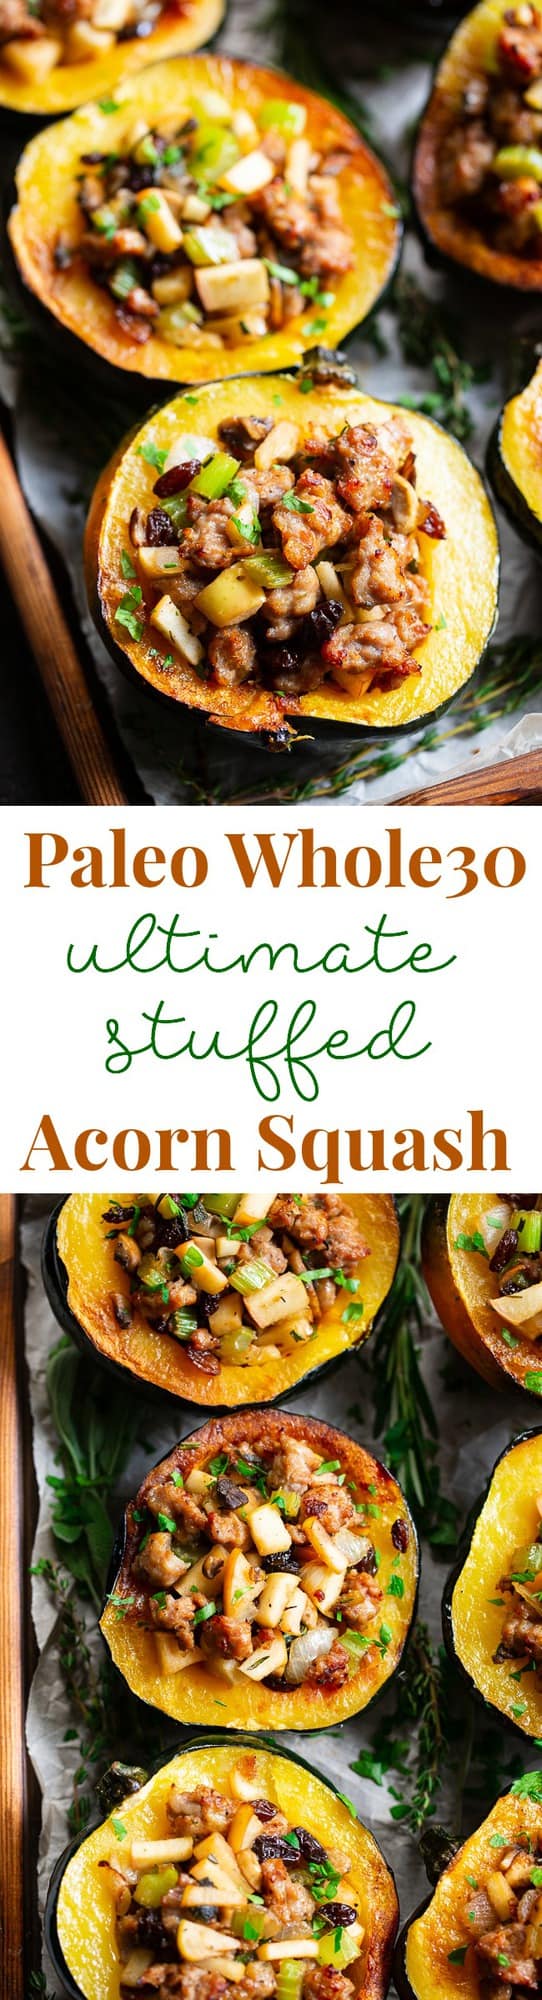 This roasted acorn squash is stuffed to the max with absolutely everything you’re craving!  Savory sausage, veggies, and herbs with sweet apples and raisins make this the ultimate stuffed roasted acorn squash this season!  Paleo, dairy-free, and Whole30 compliant.  Perfect for Thanksgiving and the holidays or anytime! Paleo Thanksgiving. Paleo holidays. Paleo recipes. Paleo dinner.